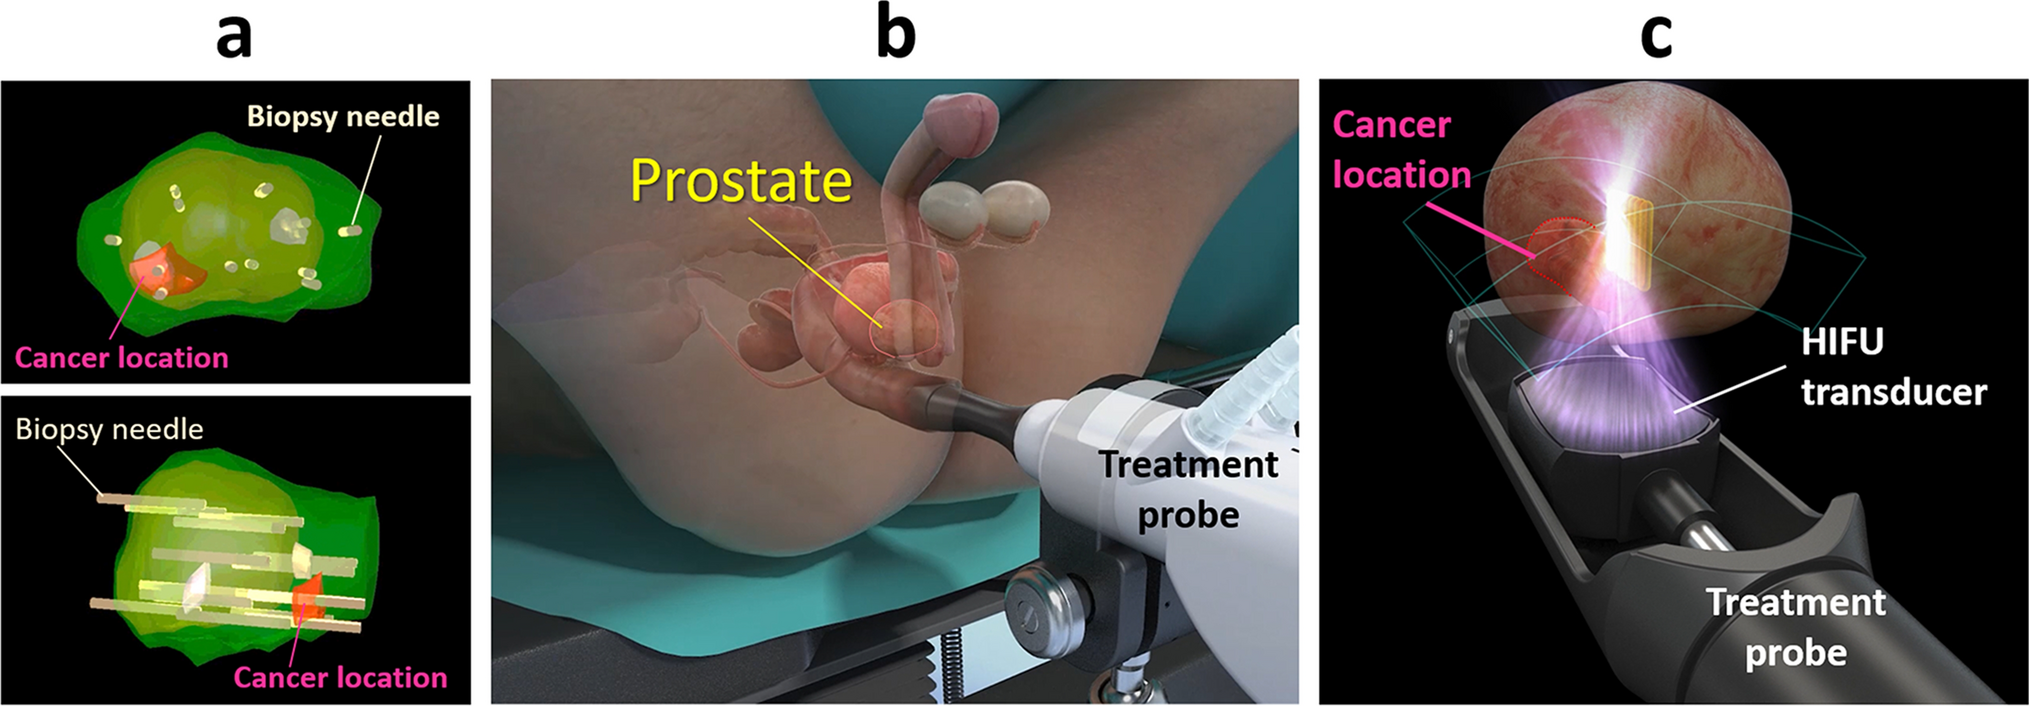 Focal therapy with high-intensity focused ultrasound for localized prostate cancer: approval as advanced medical care and future outlook